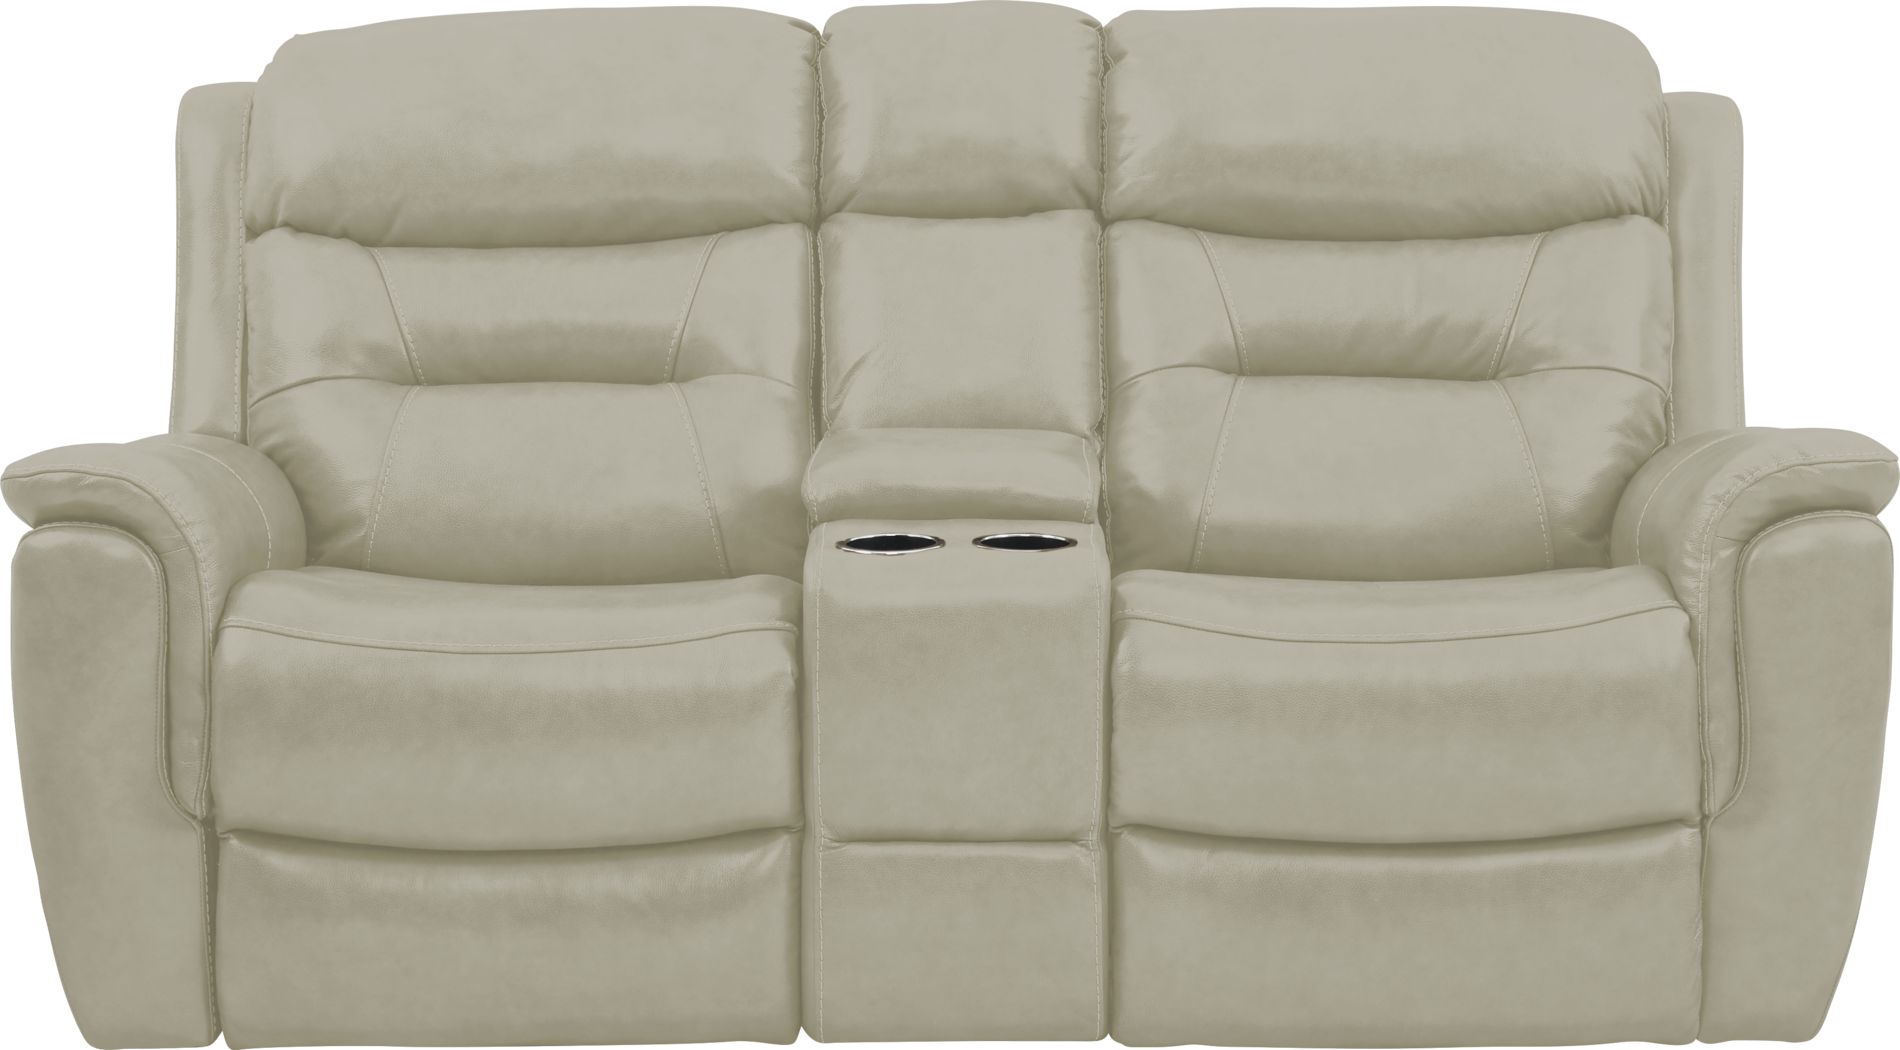 Sabella Stone Leather Reclining Console Loveseat Rooms To Go